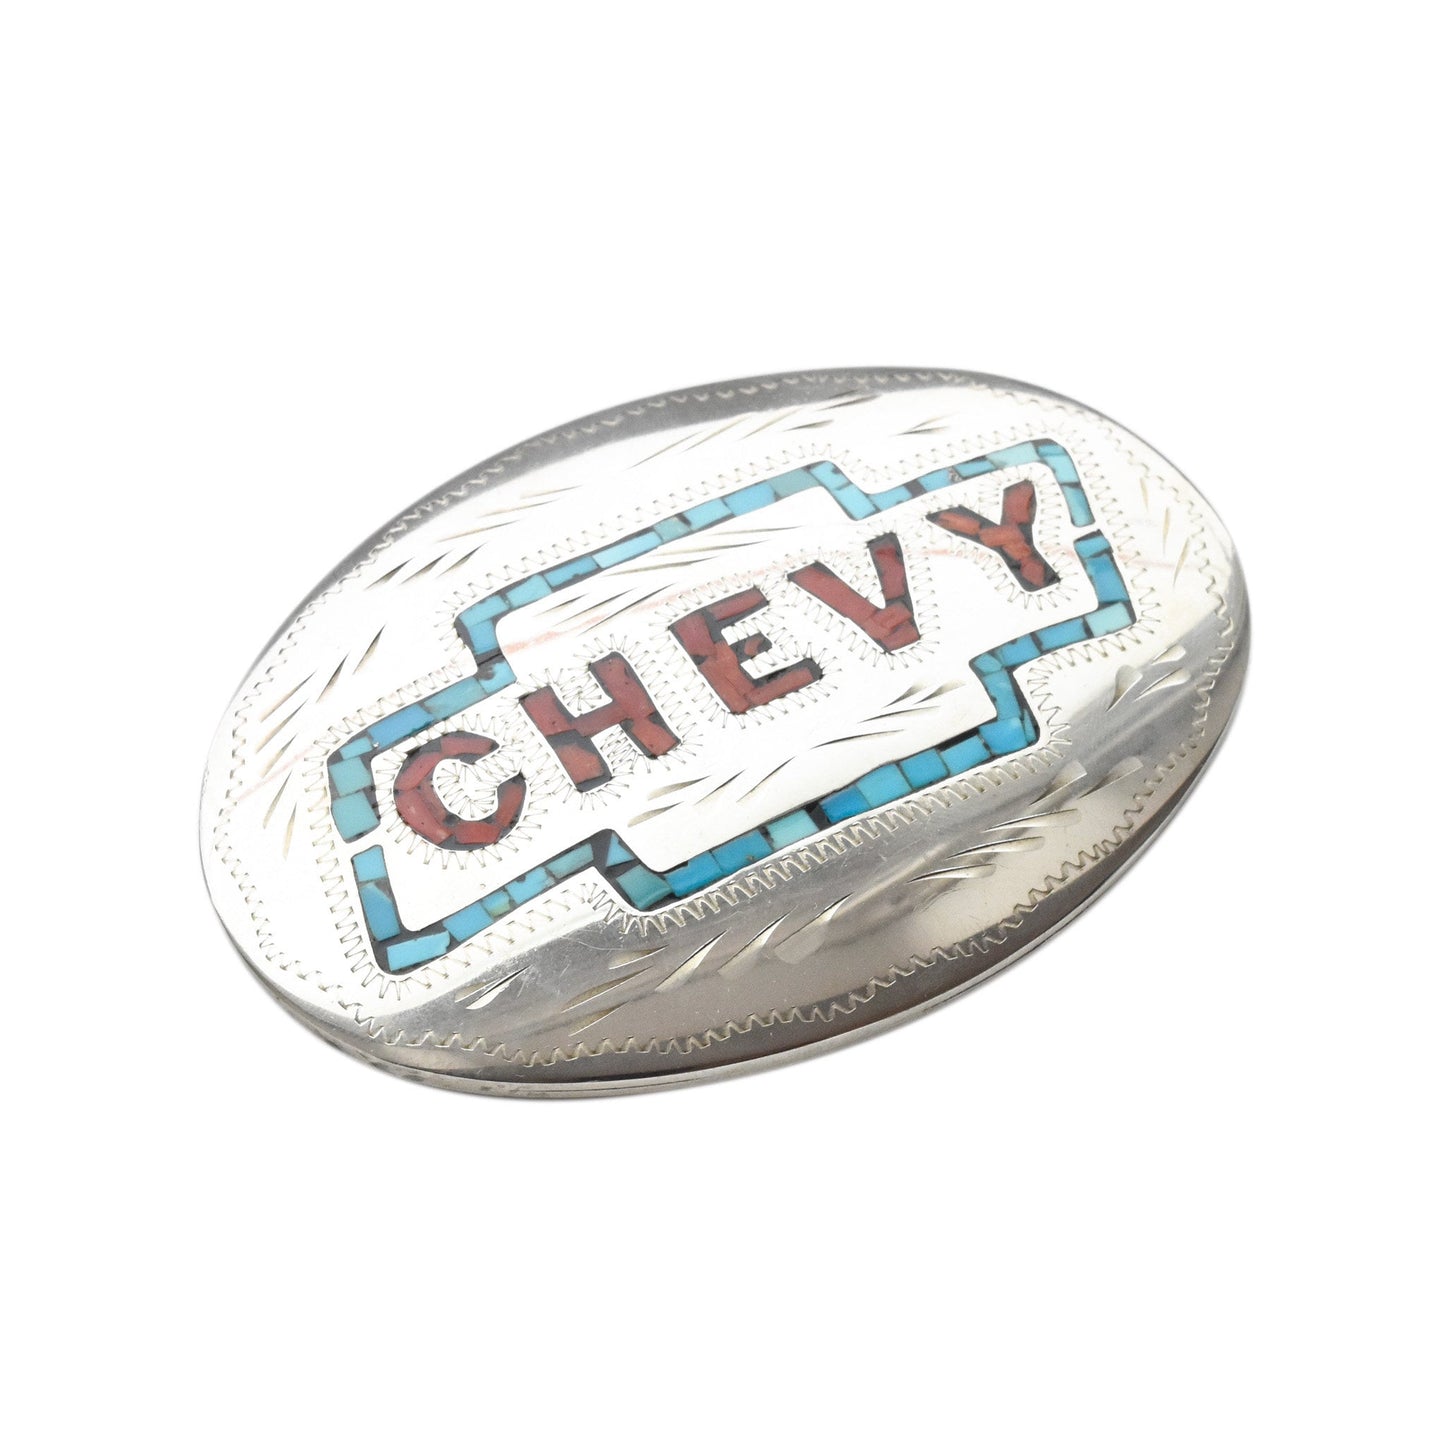 Turquoise & Coral Chip Inlay 'CHEVY' Belt Buckle, Engraved Silver, Southwestern Jewelry, 4.125"